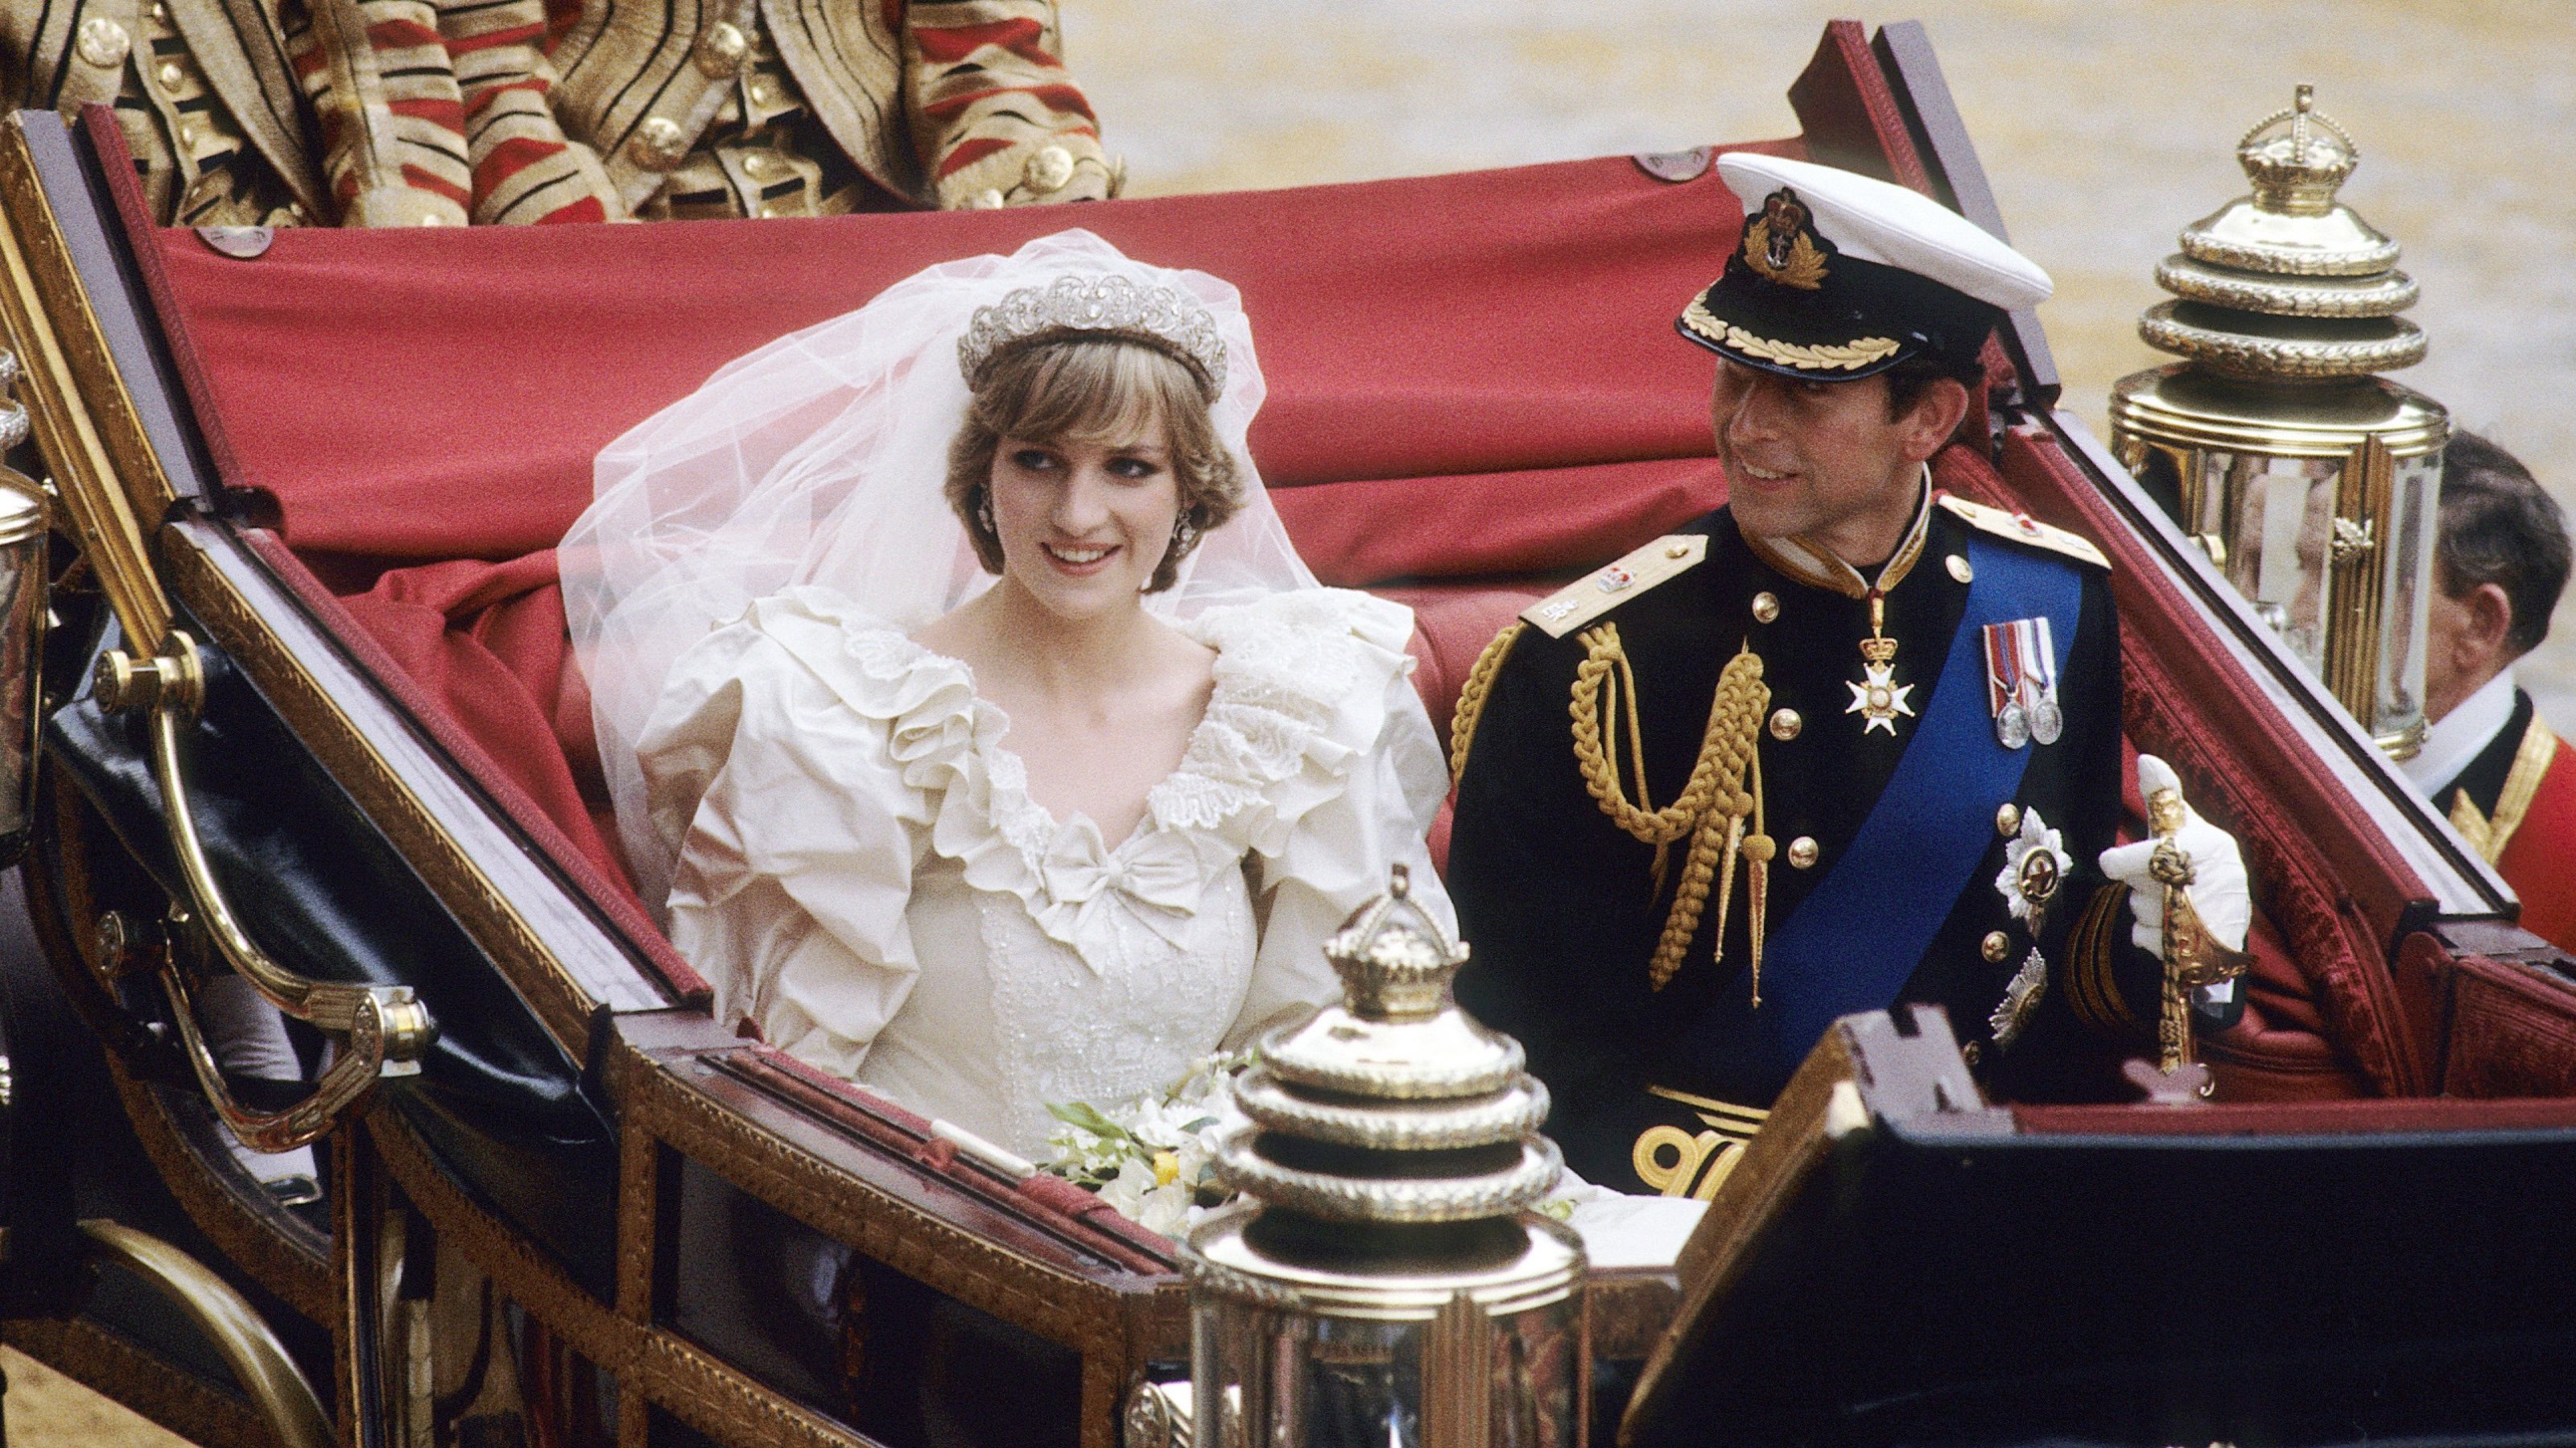 Princess Diana's wedding tiara, also known as the Spencer Tiara, worn by Diana on her special day